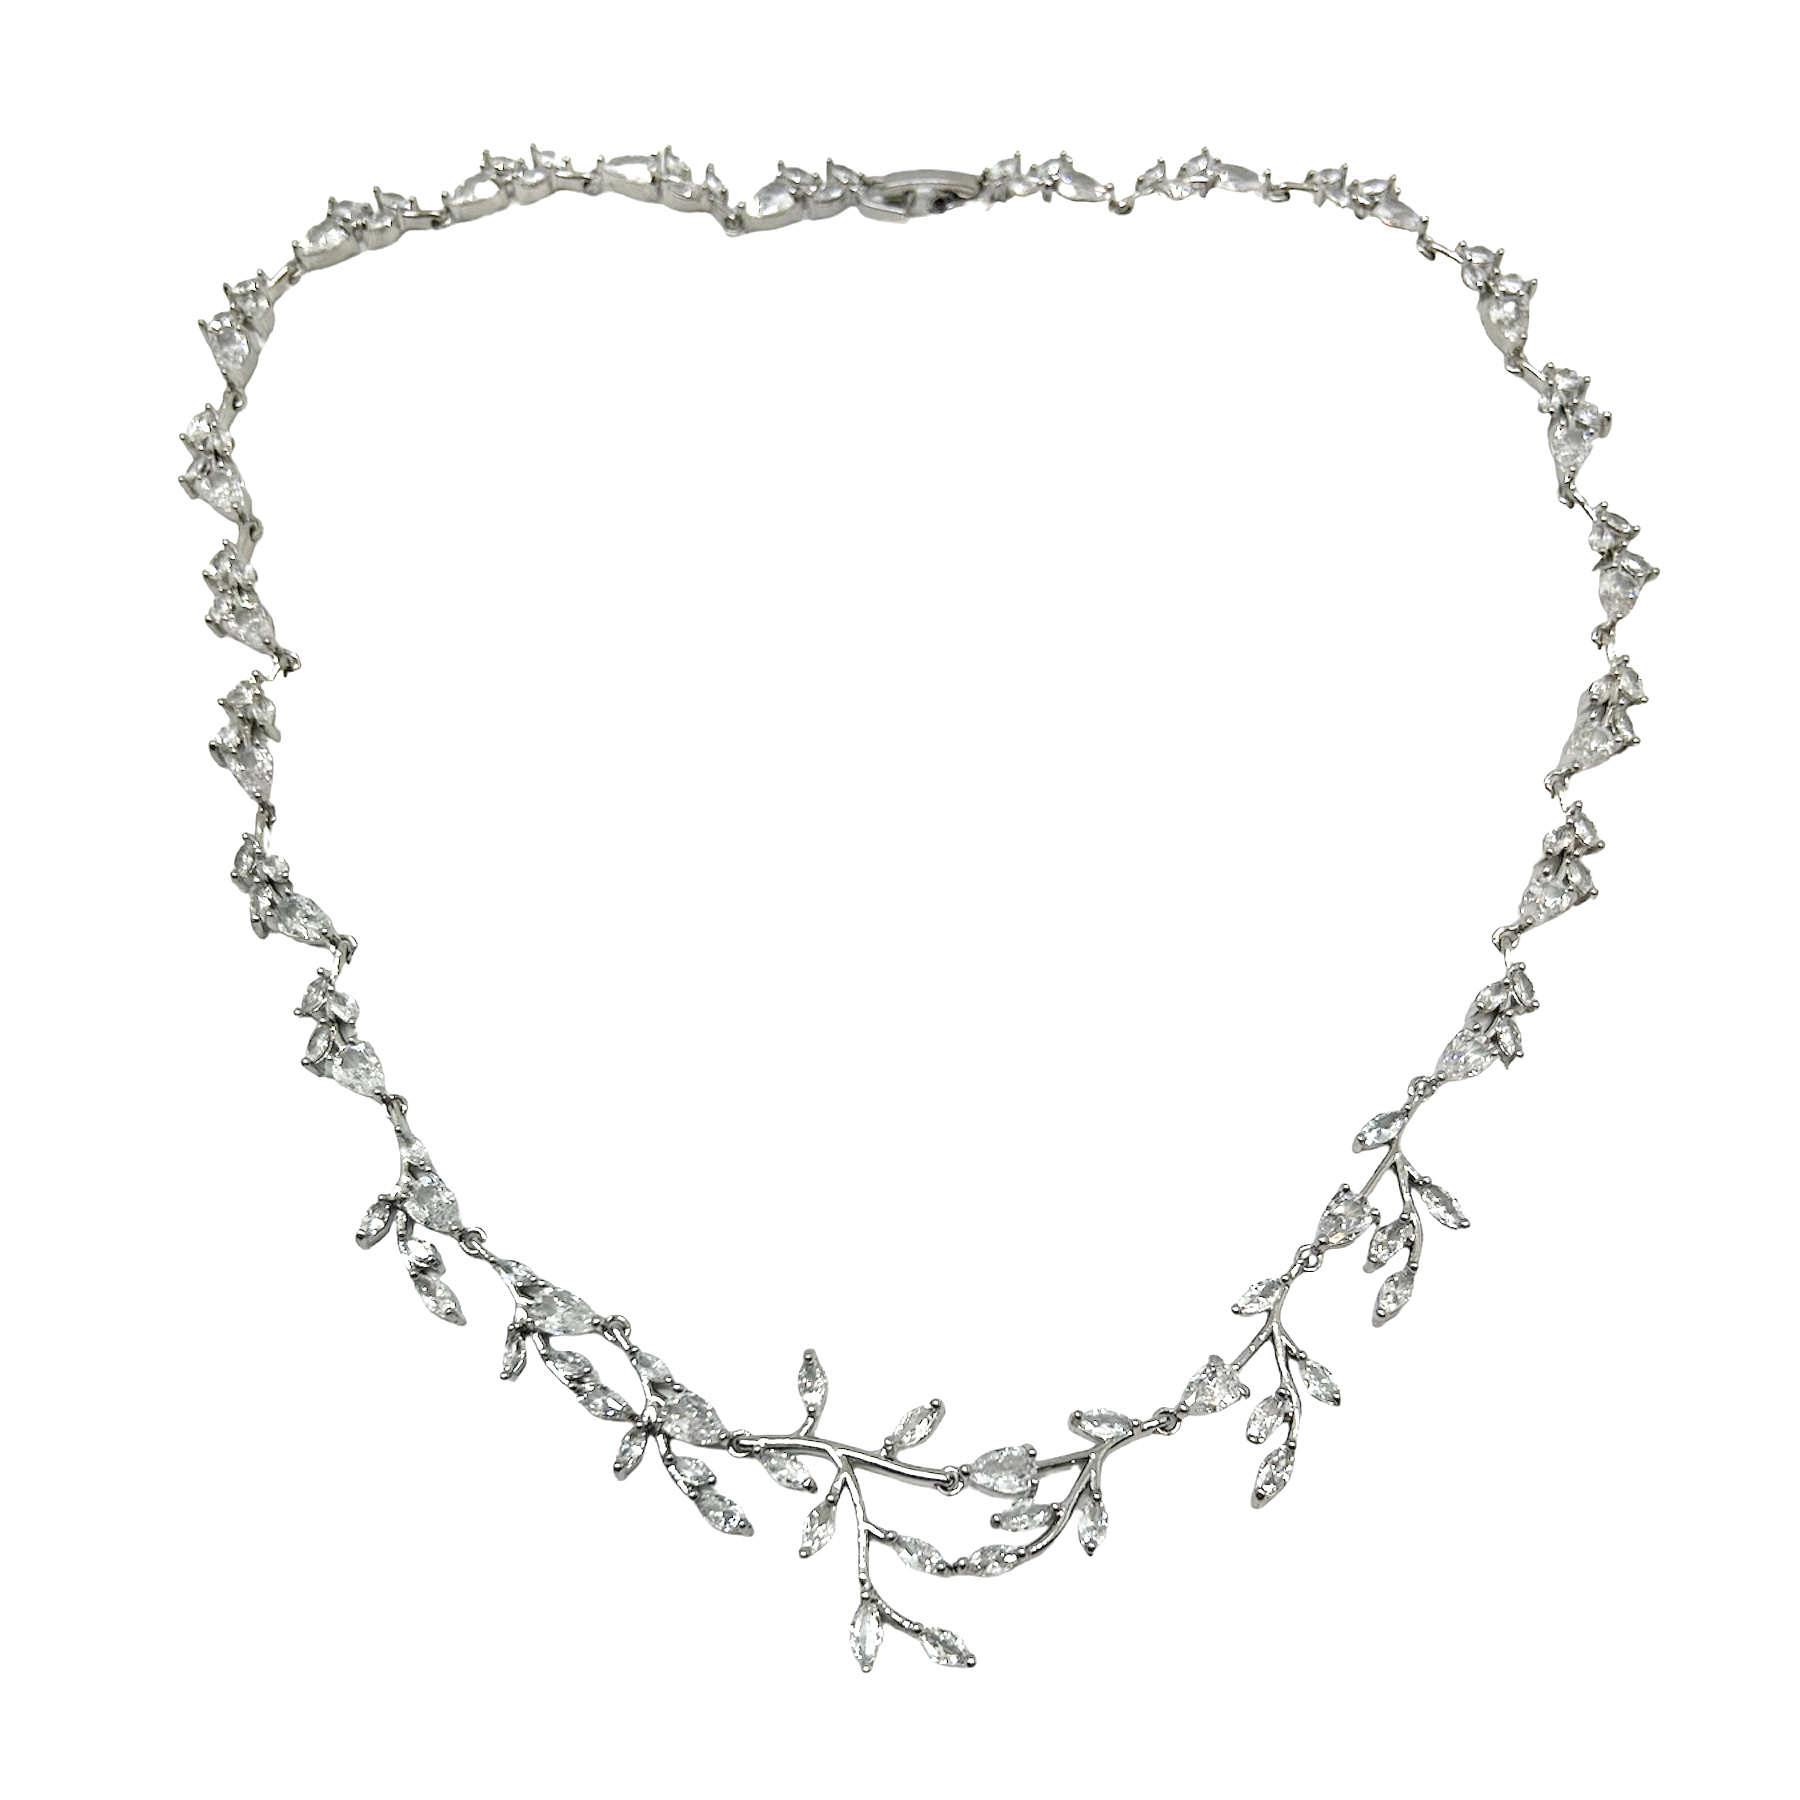 silver crystal necklace| Fiona I Jeanette Maree|Shop online now